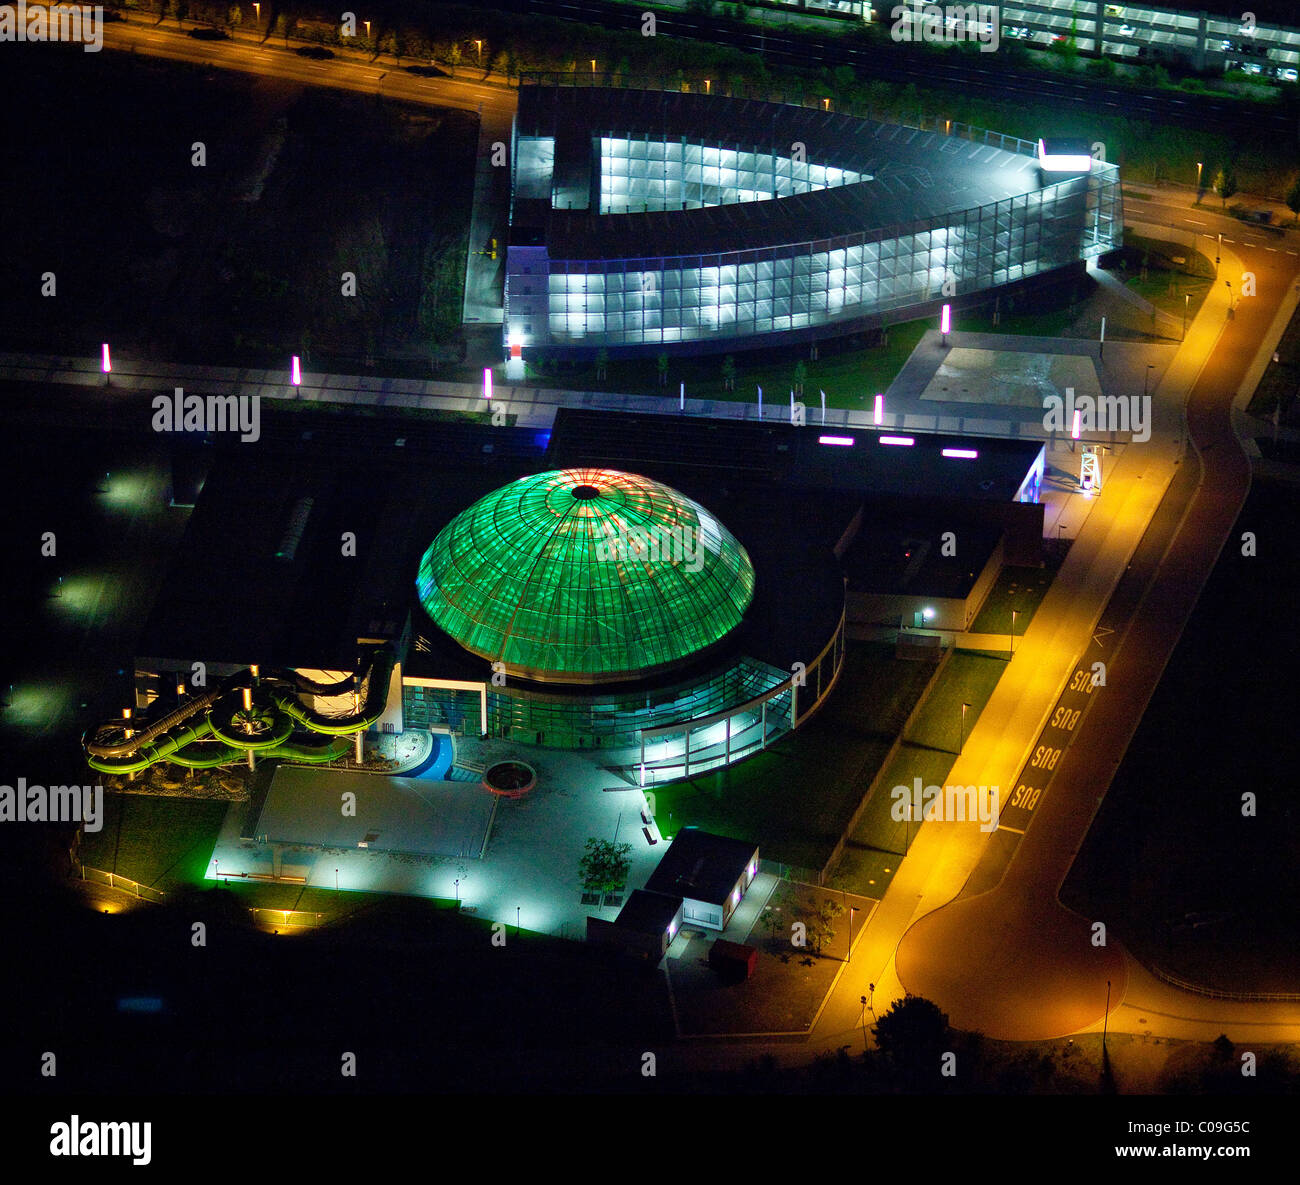 Aerial view, night, new center with gasometer, Centro, new water park, theater at night, Oberhausen, Ruhrgebiet region Stock Photo